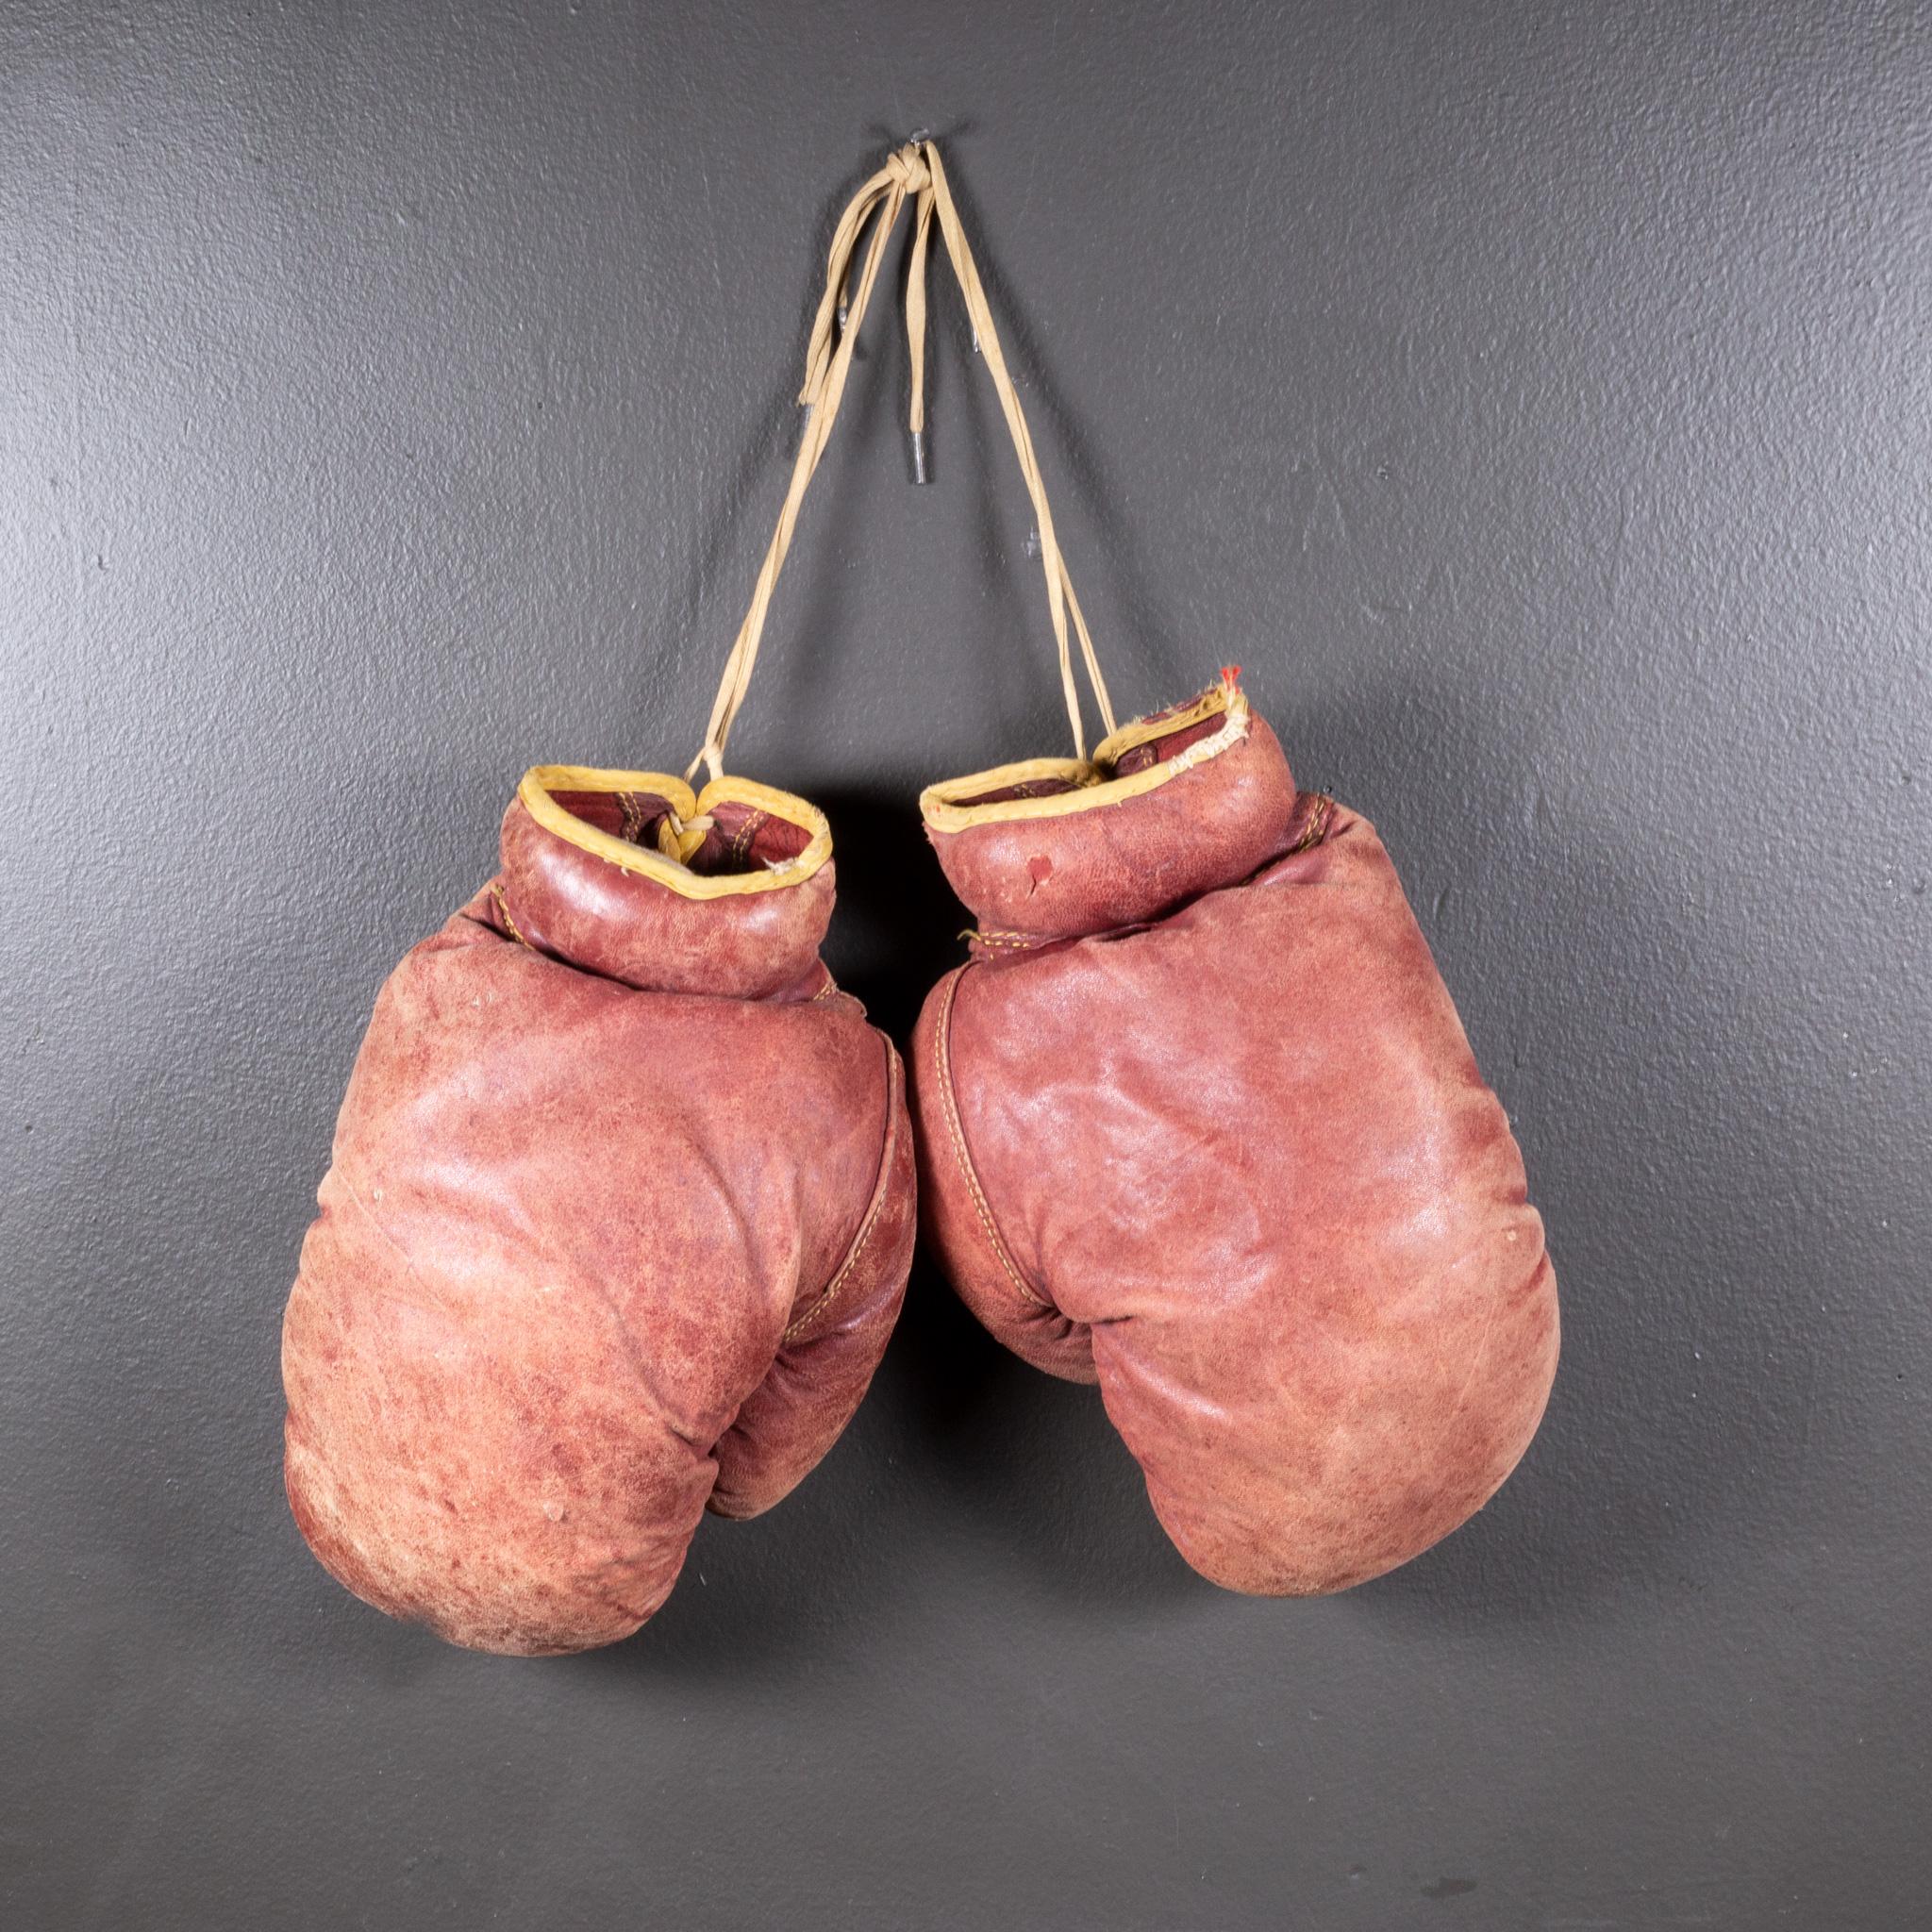 ABOUT

A pair of authentic vintage boxing gloves with reddish, brown leather. Each glove has gold leather piping. The leather is very soft and is good condition. Stamped 